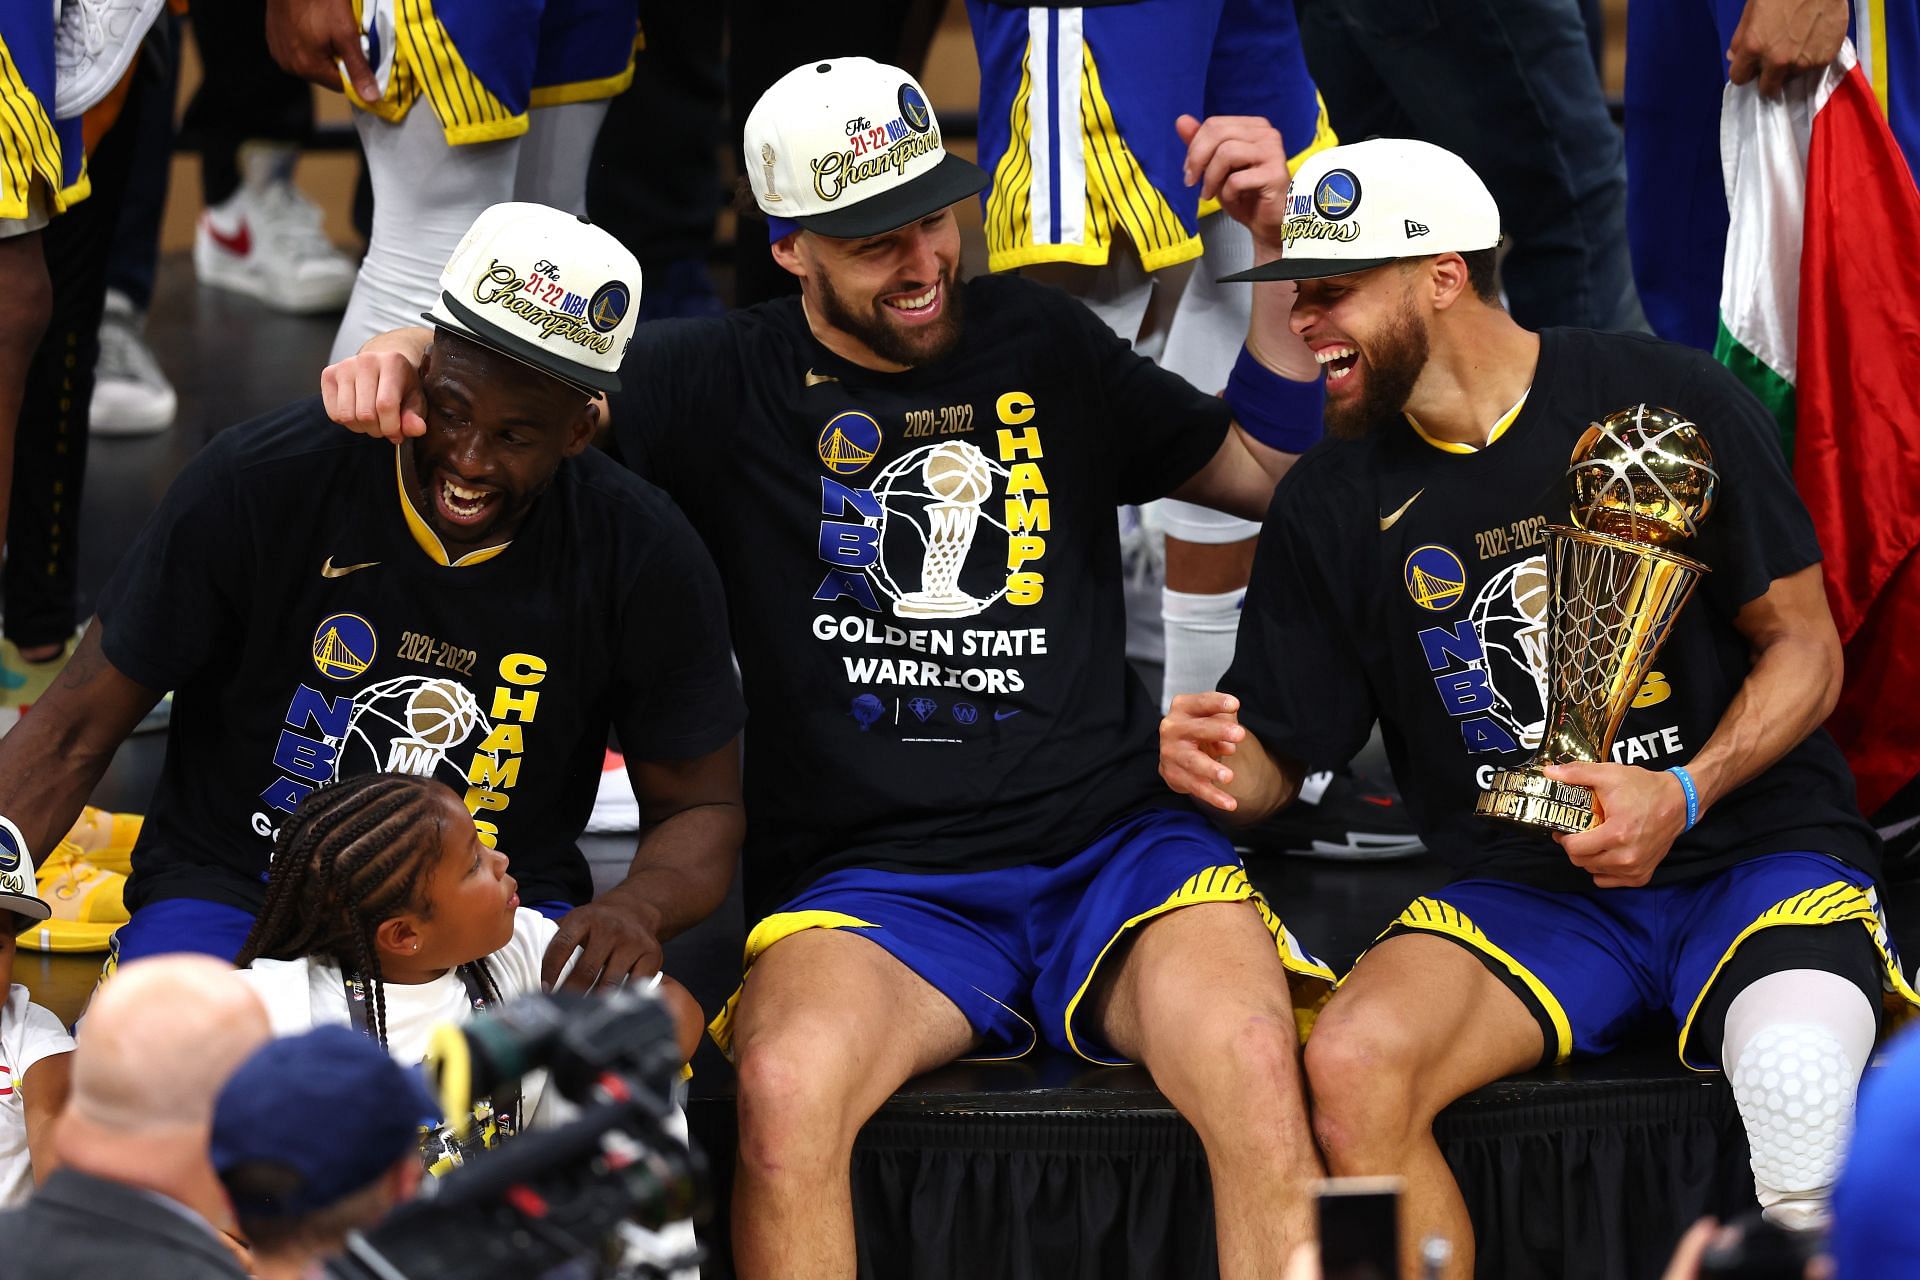 Draymond Green (left), Klay Thompson (middle) and Stephen Curry of the Golden State Warriors